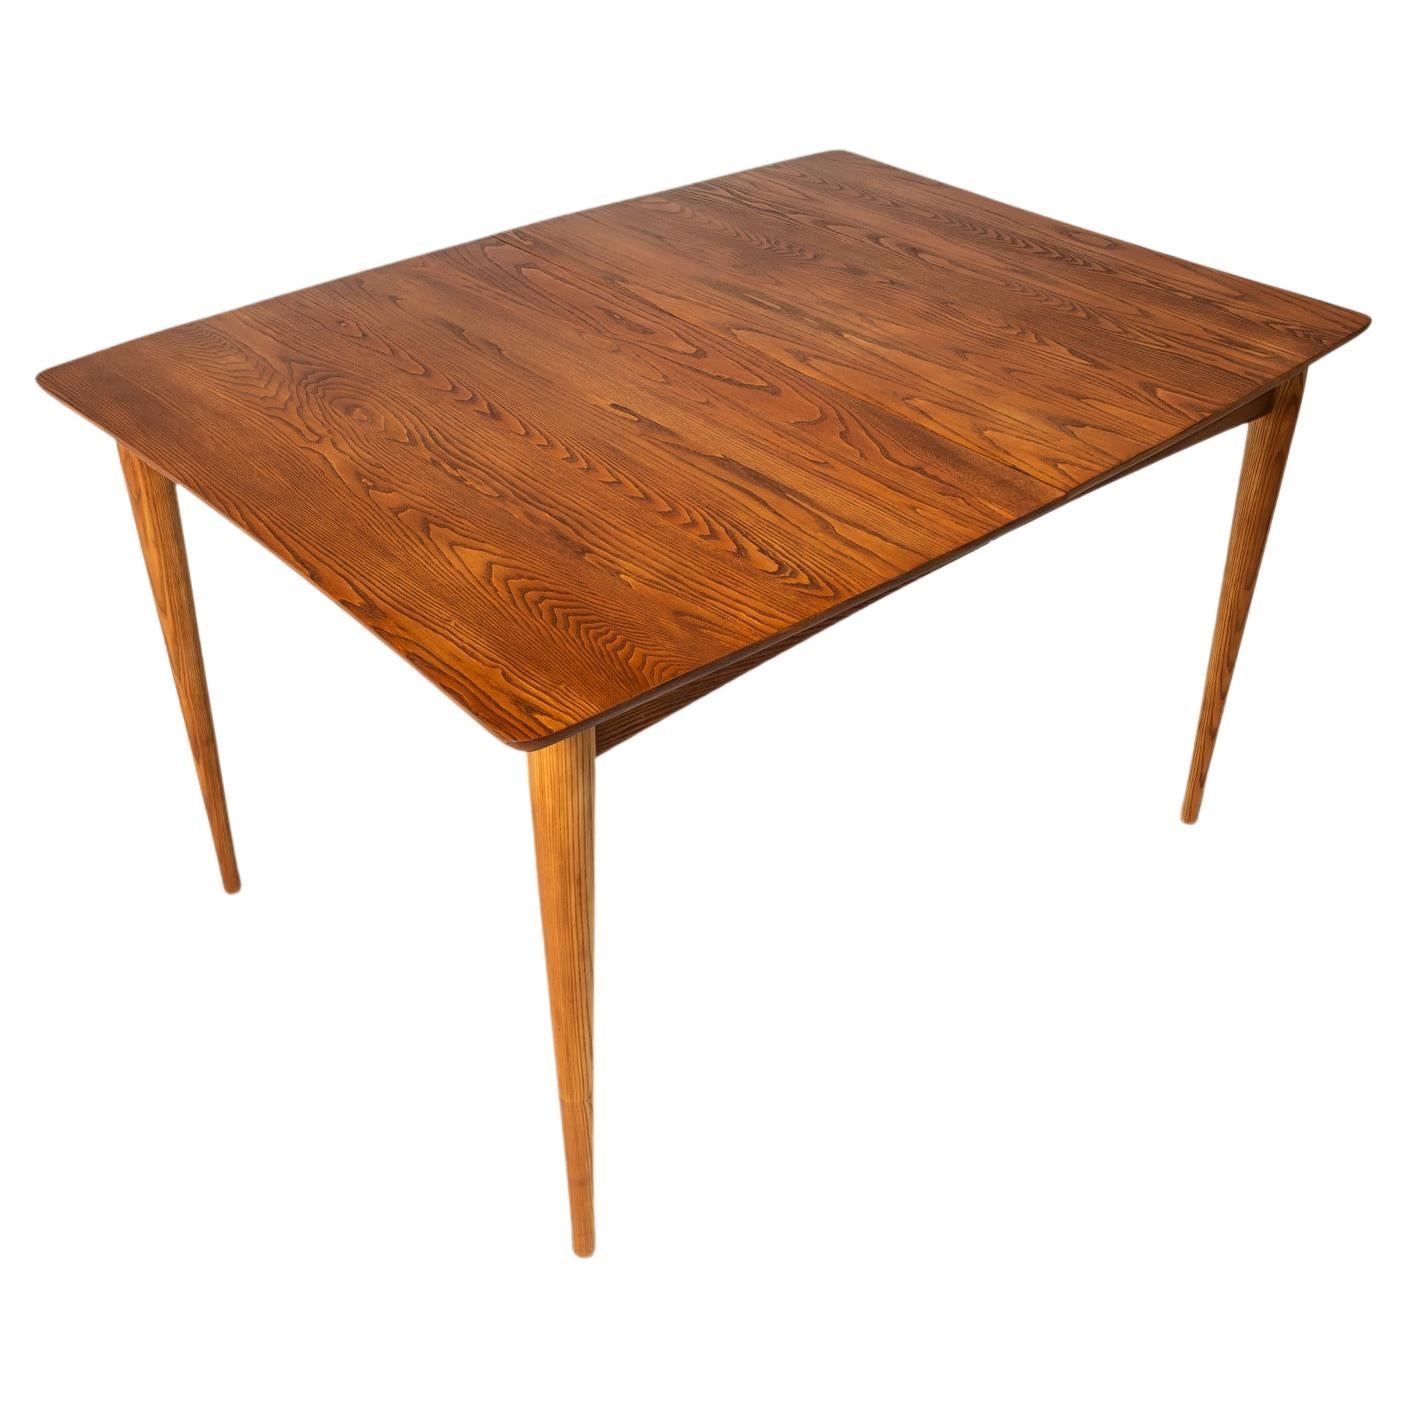 Angular Mid-Century Modern Extension Dining Table in Solid Oak, Usa, circa 1960s